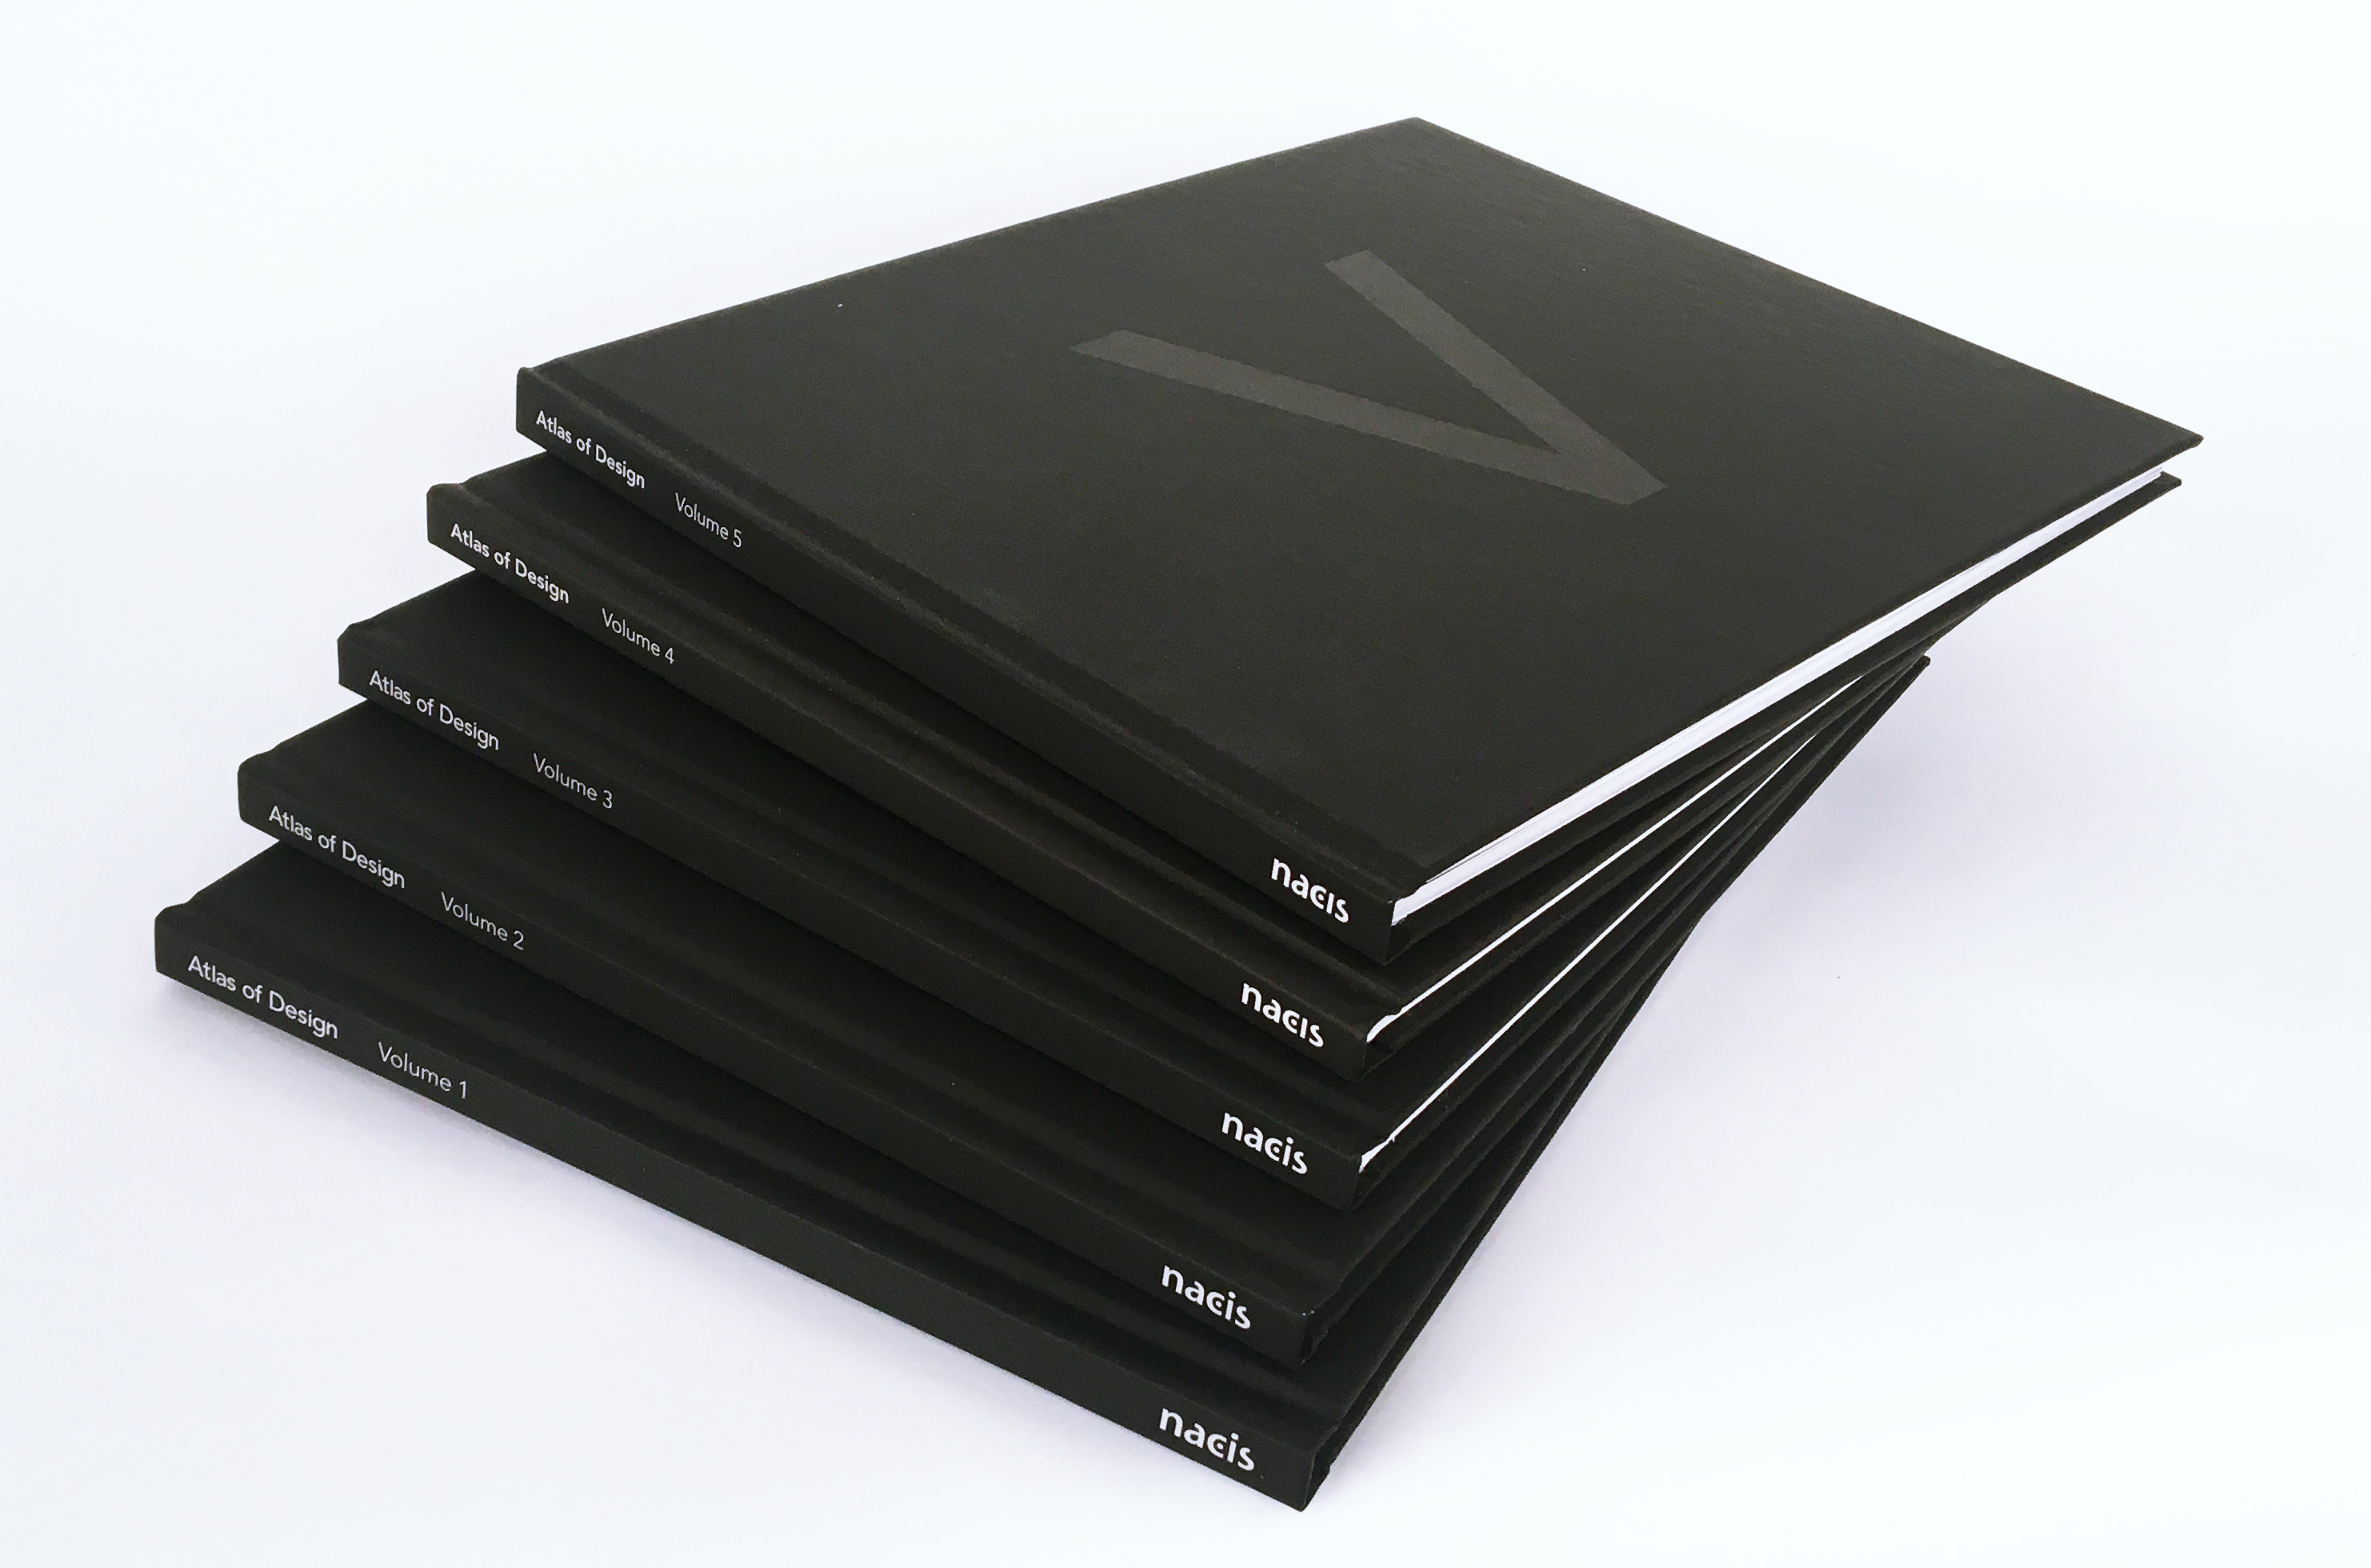 Stack of Atlas of Design Volumes 1 through 5 on a white background